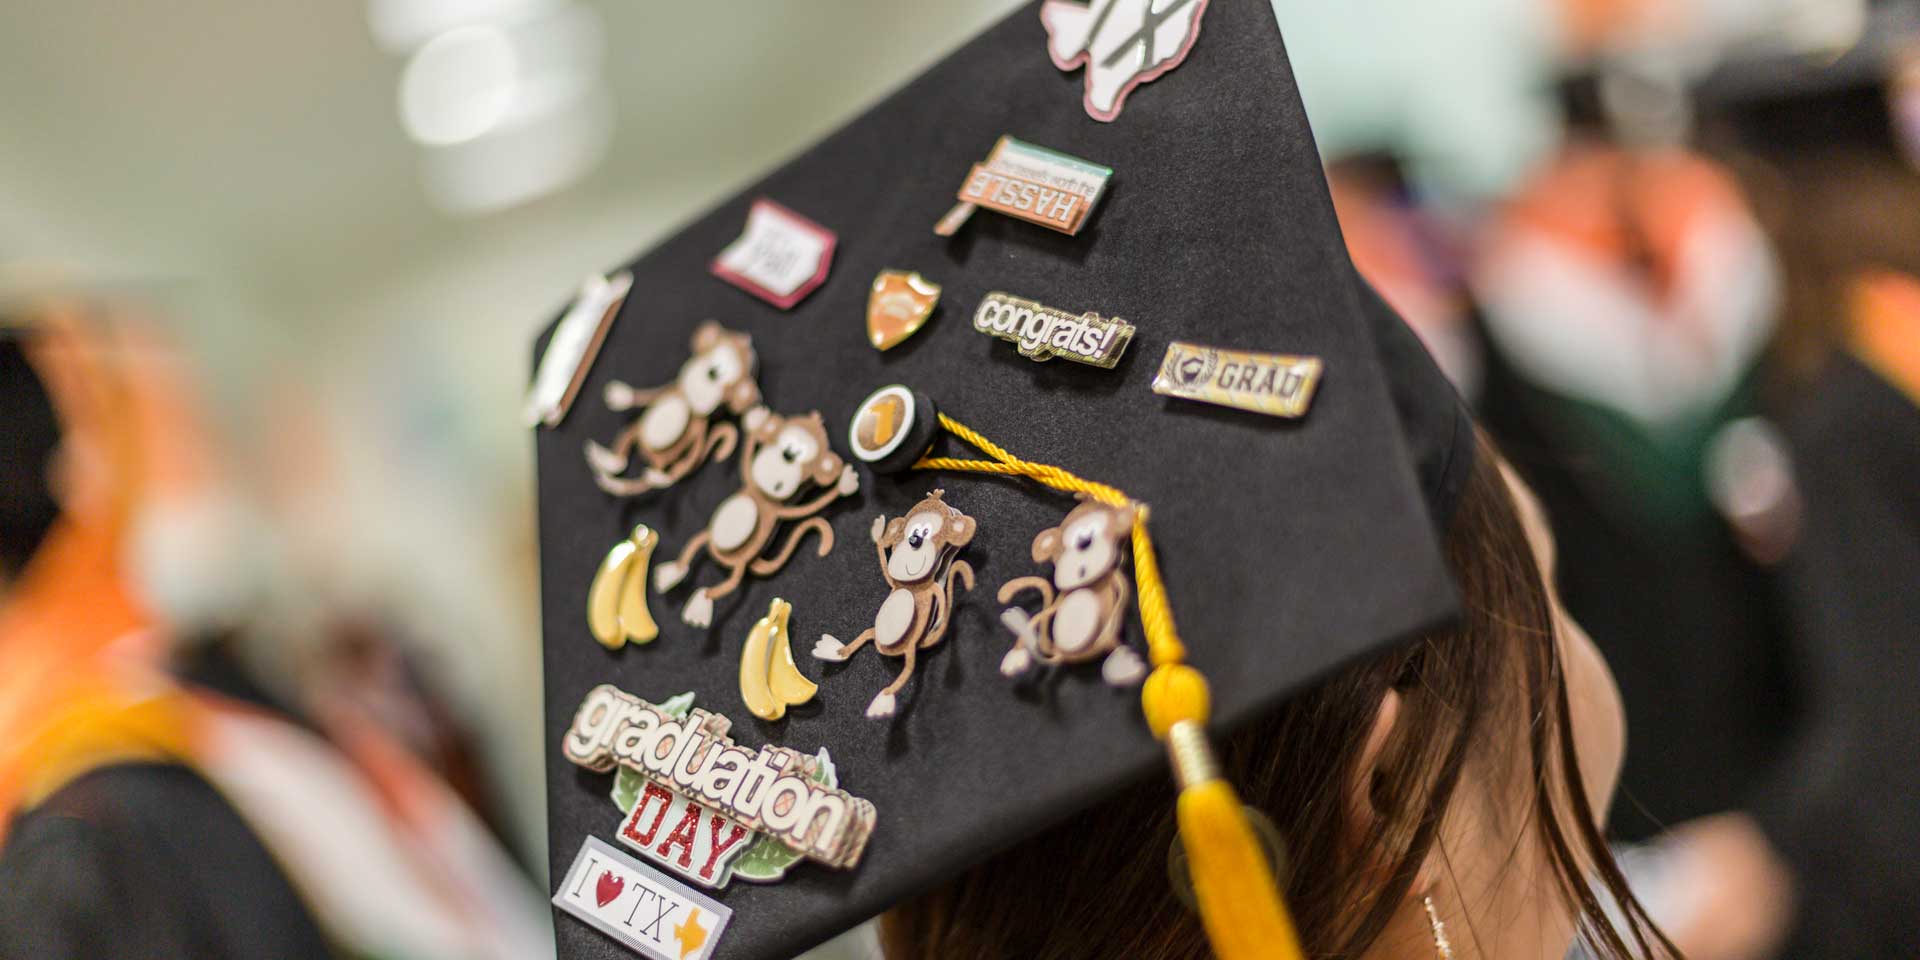 She earned a master's degree in finance and personalized her mortarboard with characters representing her birth during the Year of the Monkey and with Texas-themed decorations.